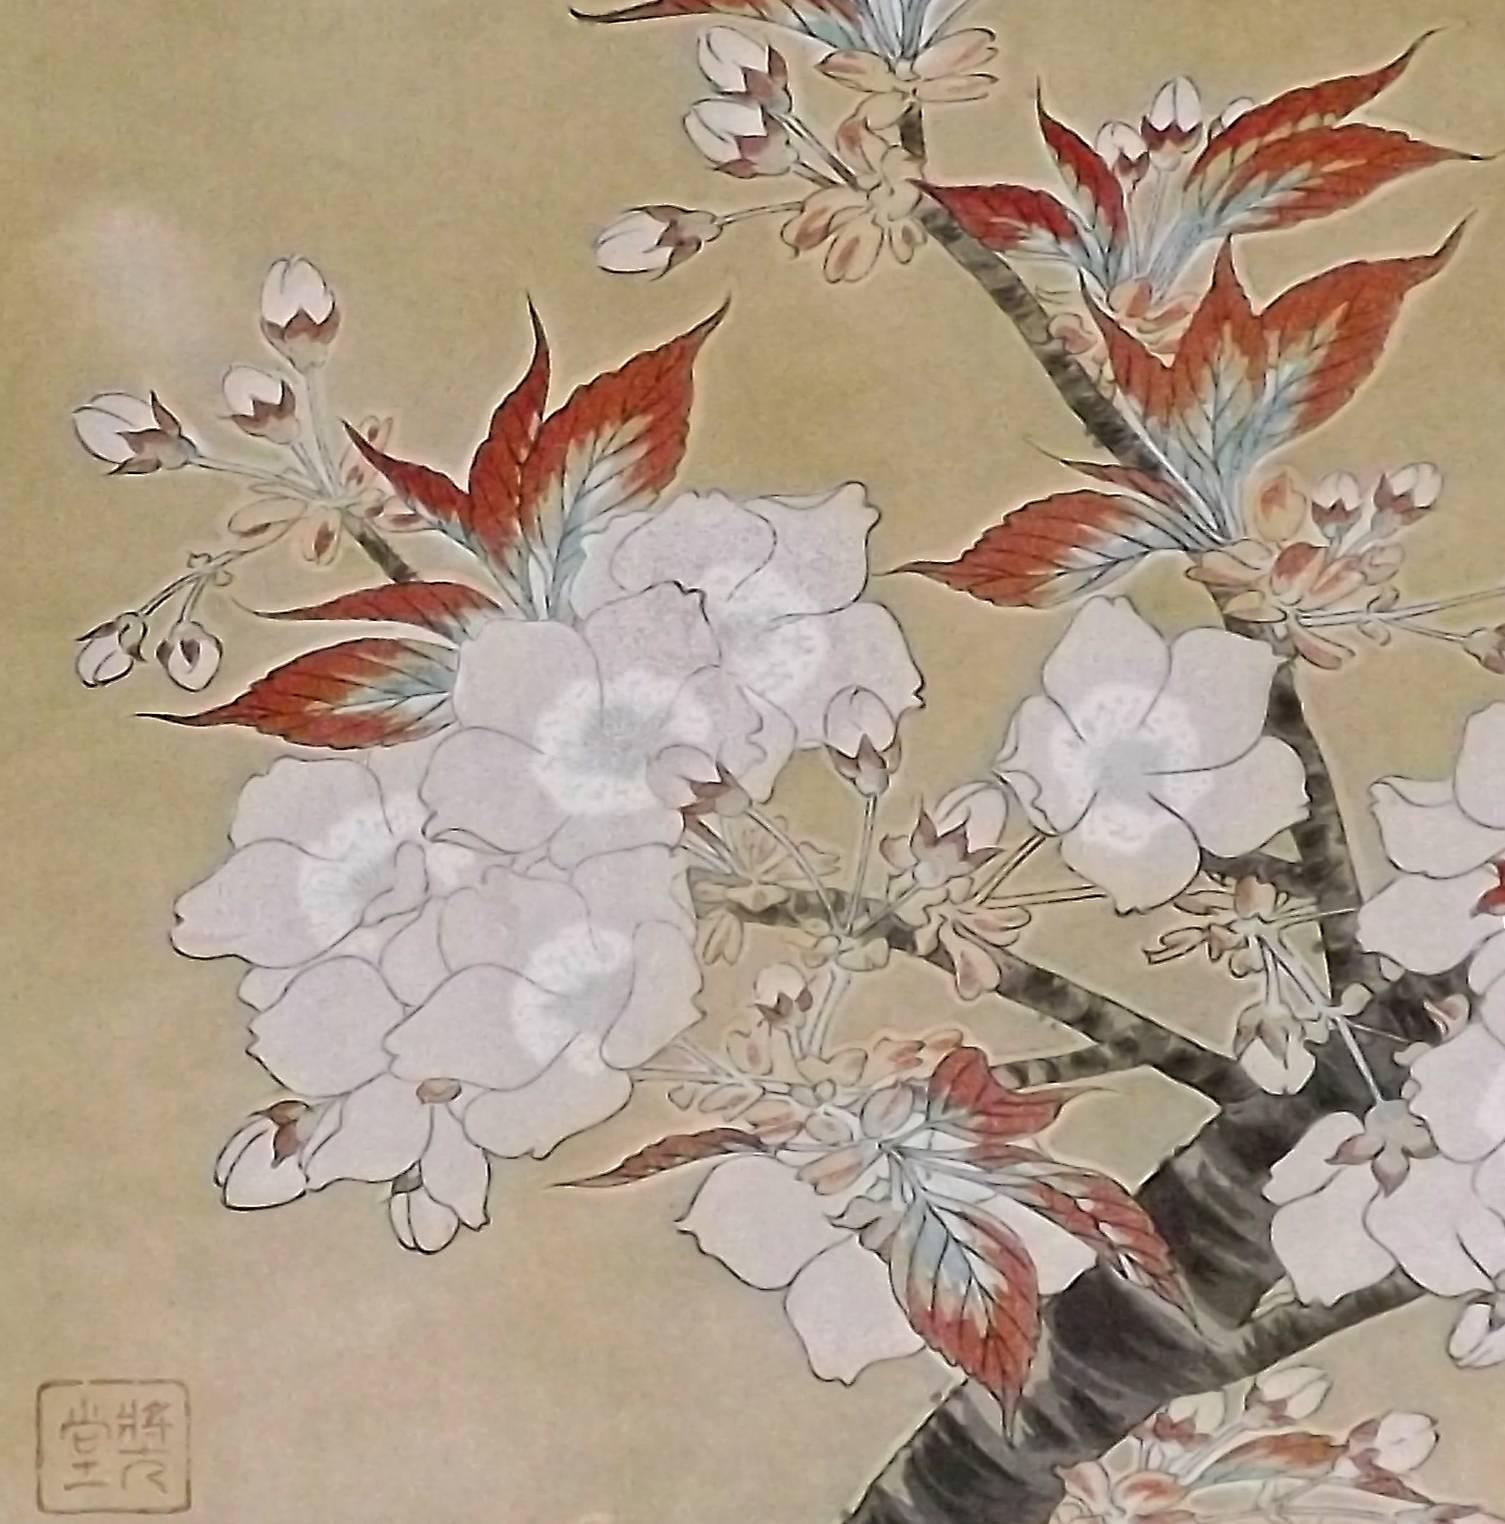 Japanese Woodblock Print of Cherry Blossoms by Kawarazaki Shodo In Good Condition For Sale In Charlevoix, MI